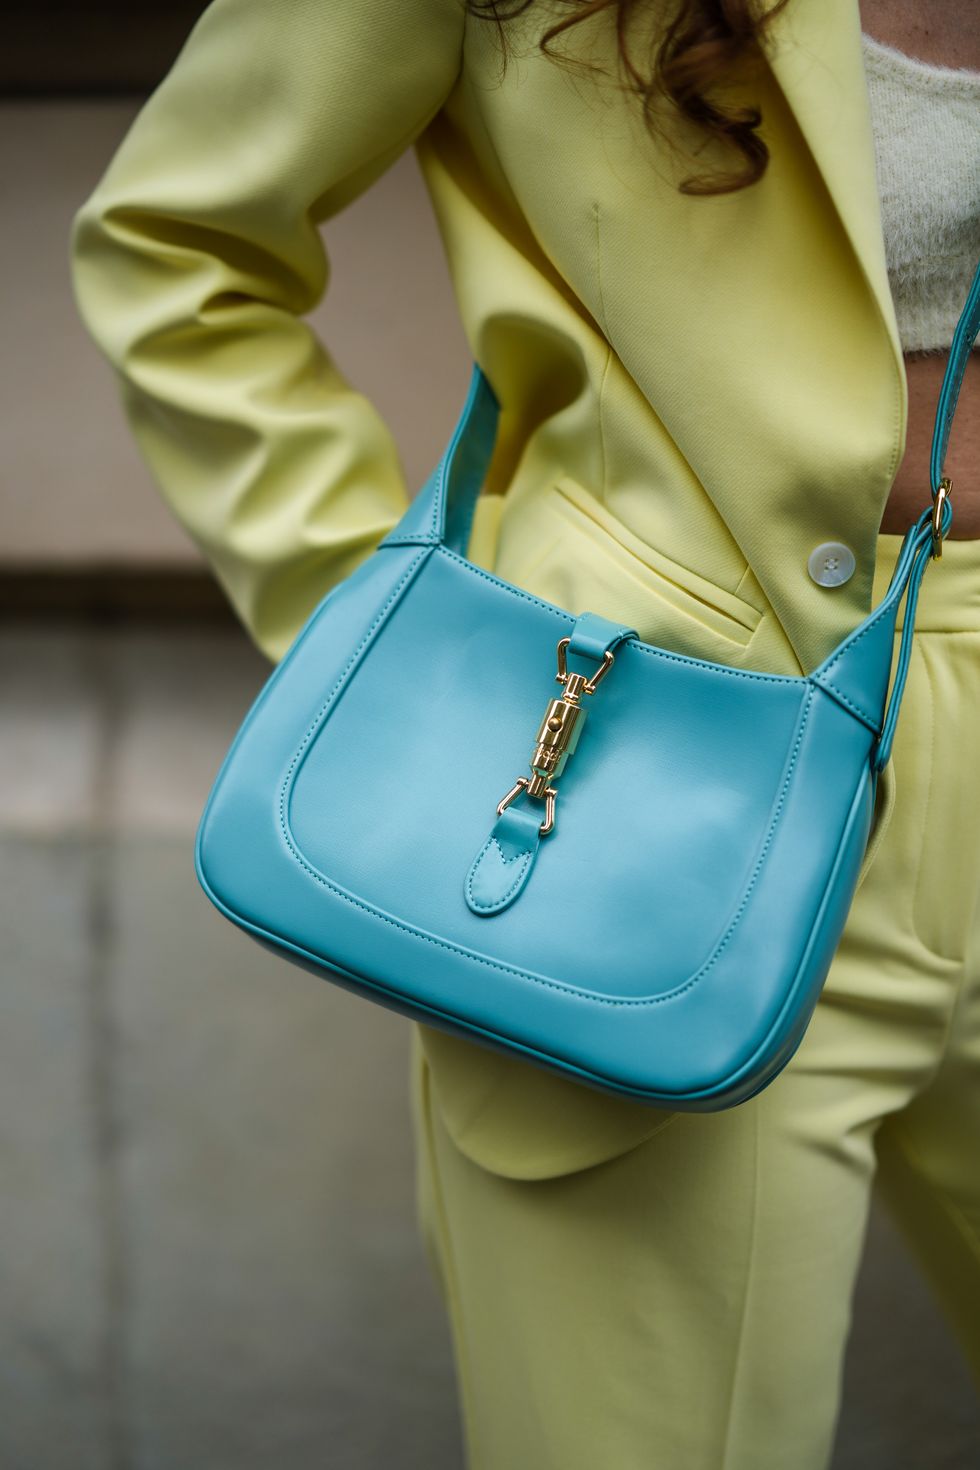 5 Cute Spring 2022 Bag Trends to Shop Now